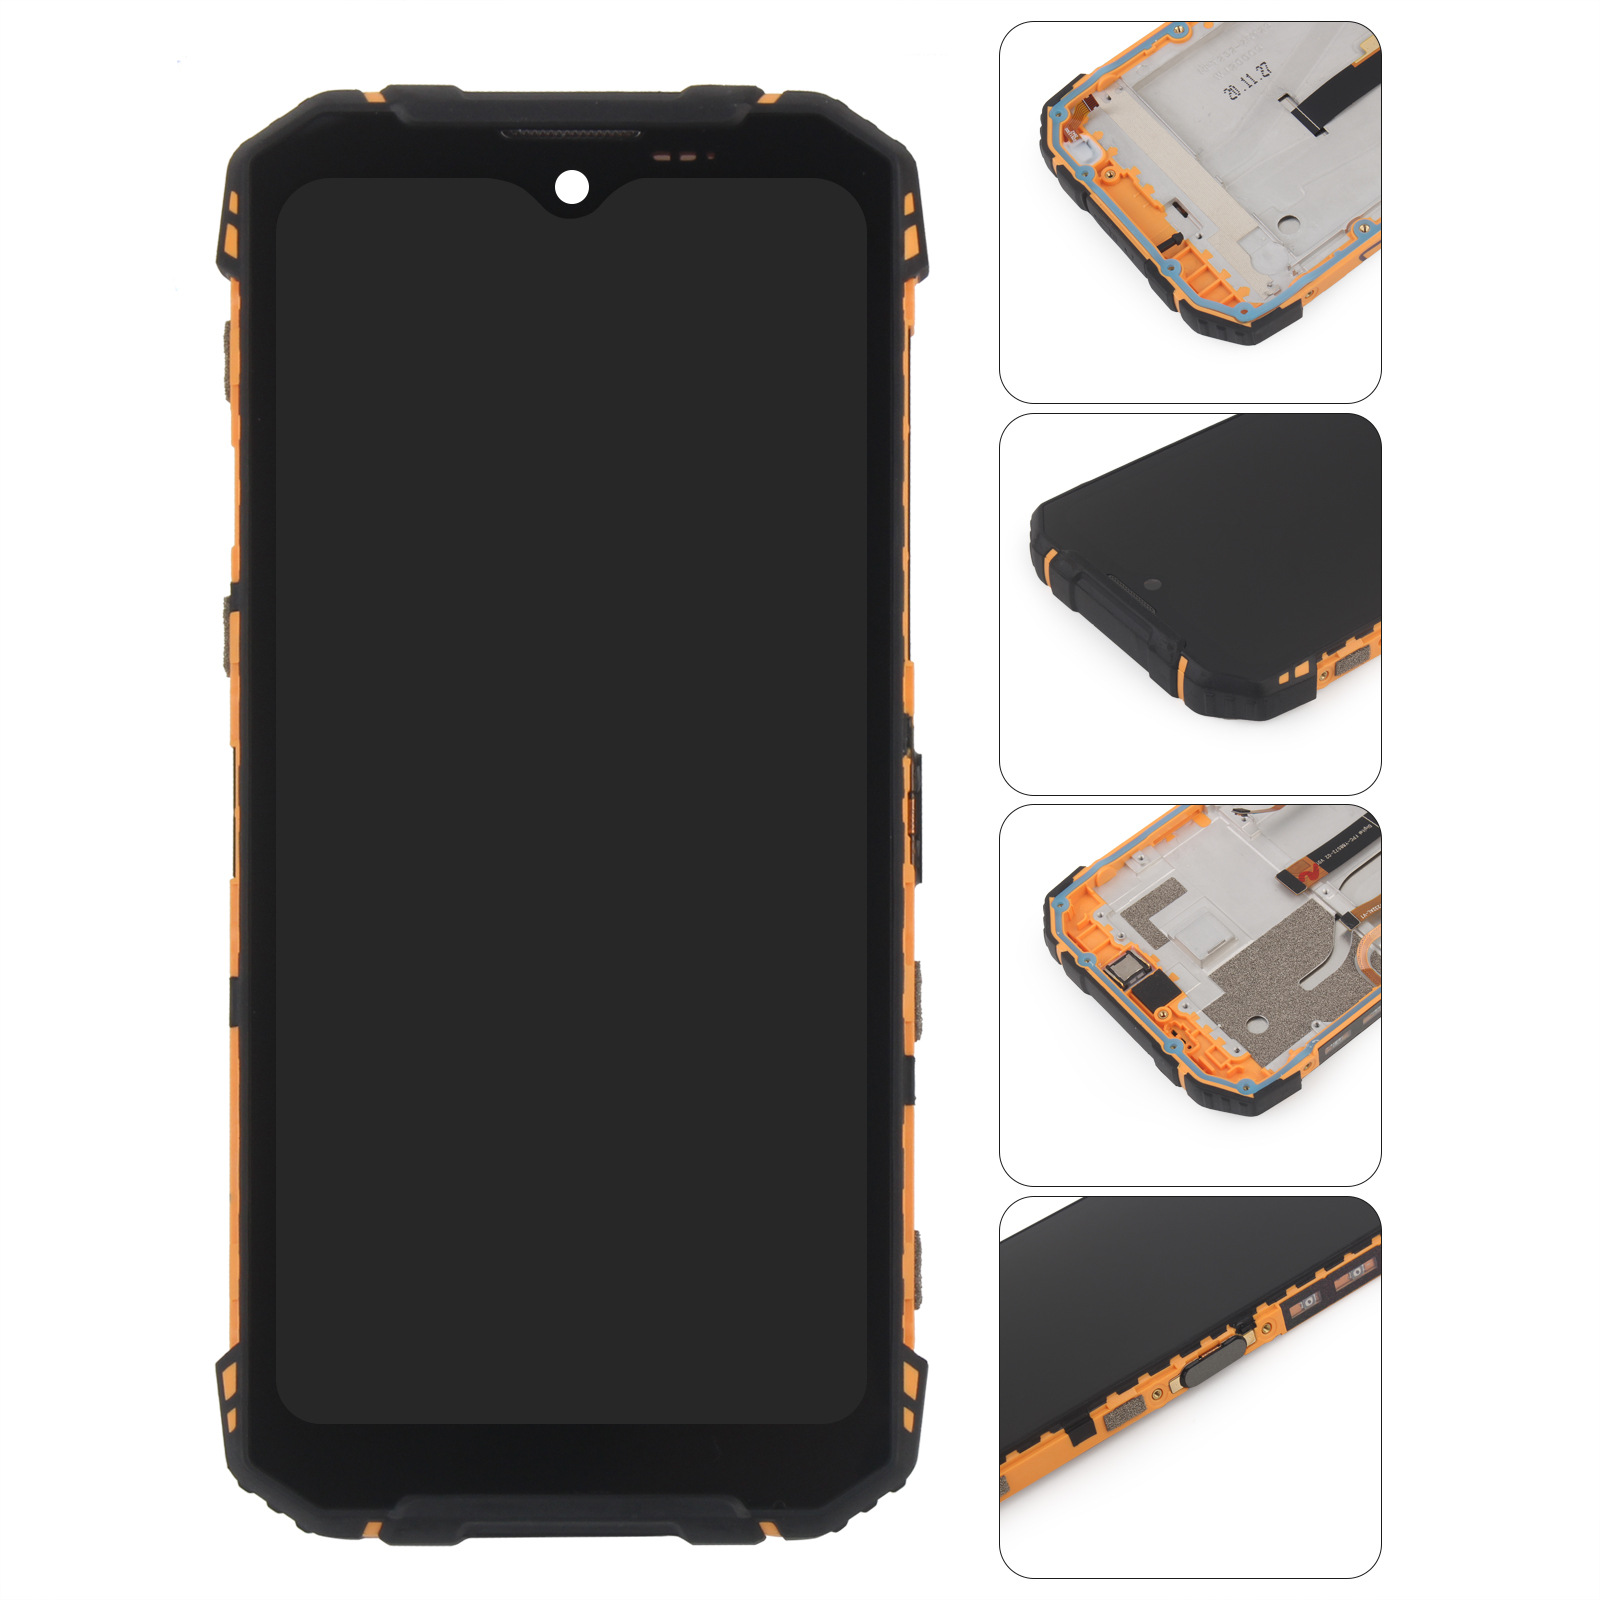 DOOGEE-Original-for-Doogee-S96-Pro-LCD-Display--Touch-Screen-Digitizer-Assembly-Replacement-Parts-wi-1868571-3